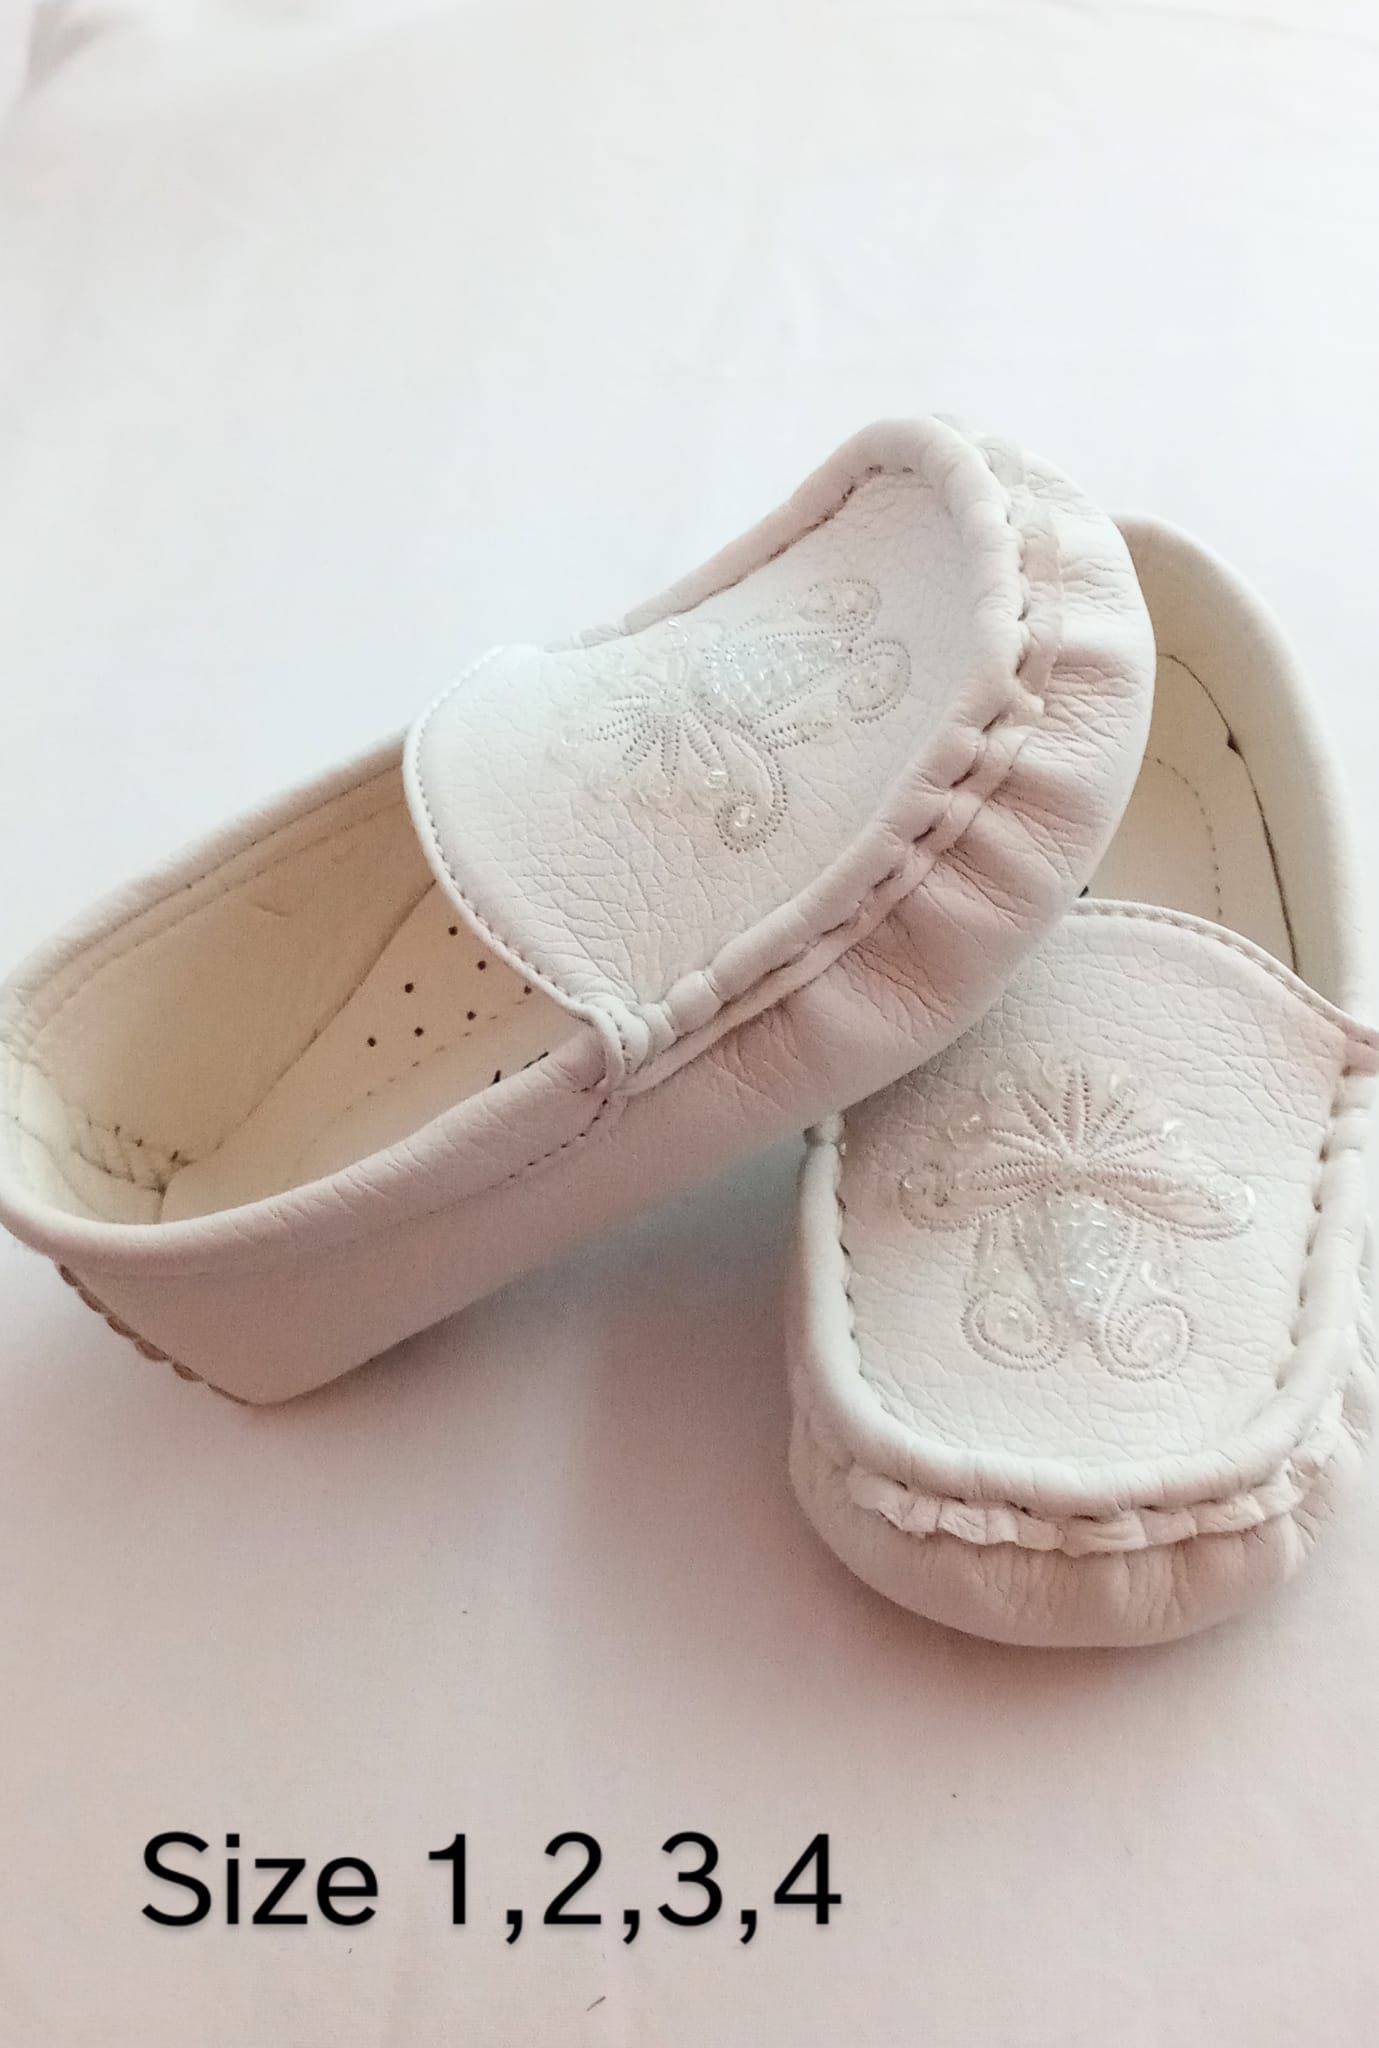 Entrance shoe for babies in black and white, in size 1 to 4